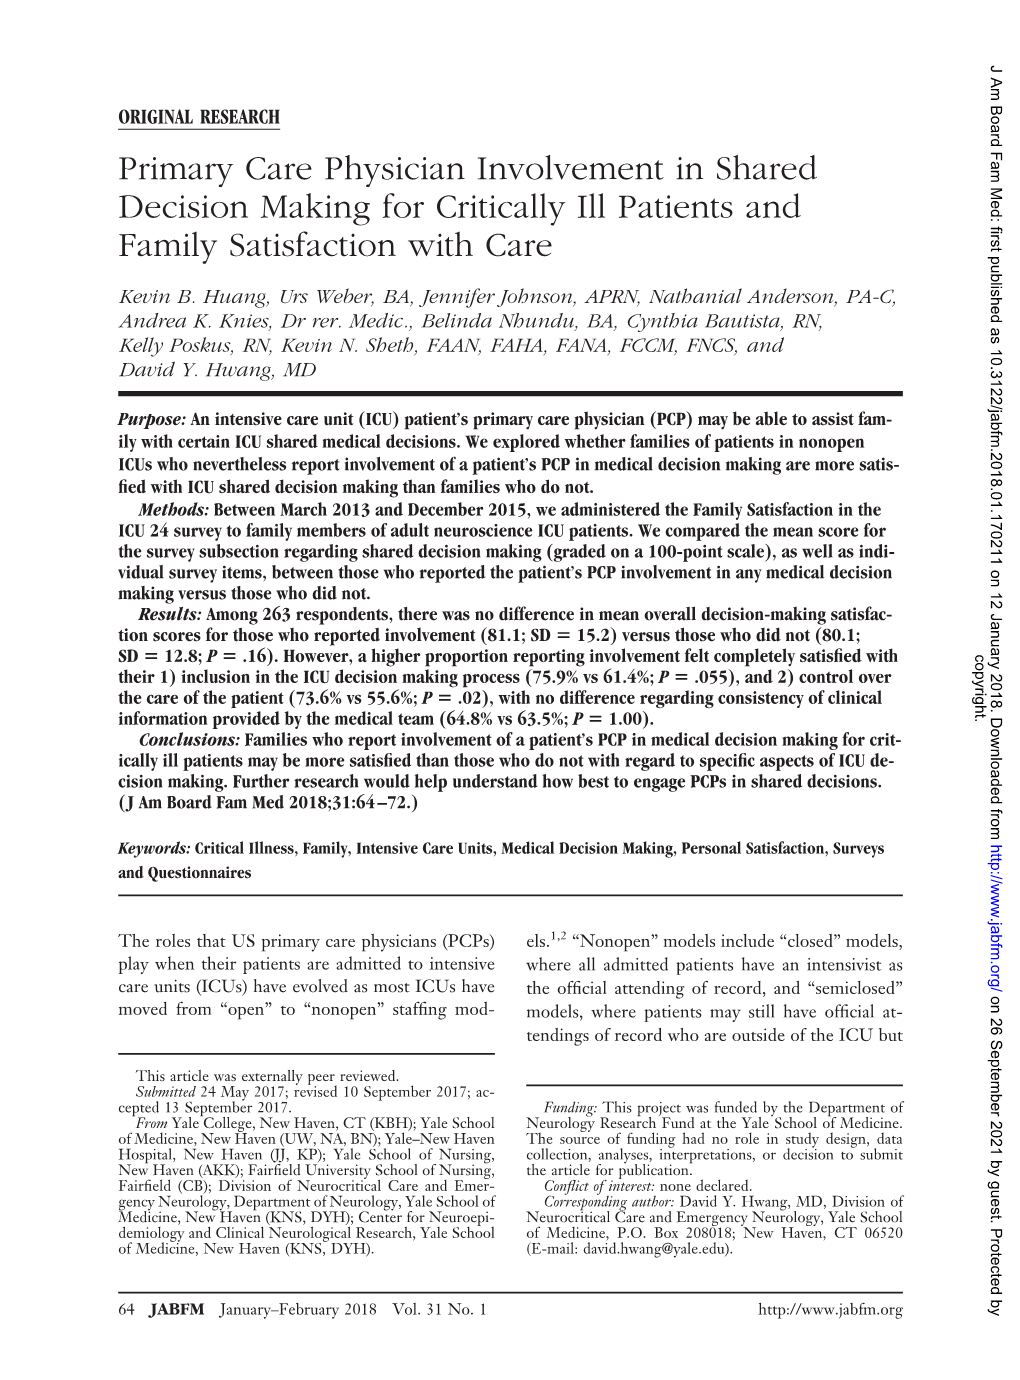 Primary Care Physician Involvement in Shared Decision Making for Critically Ill Patients and Family Satisfaction with Care